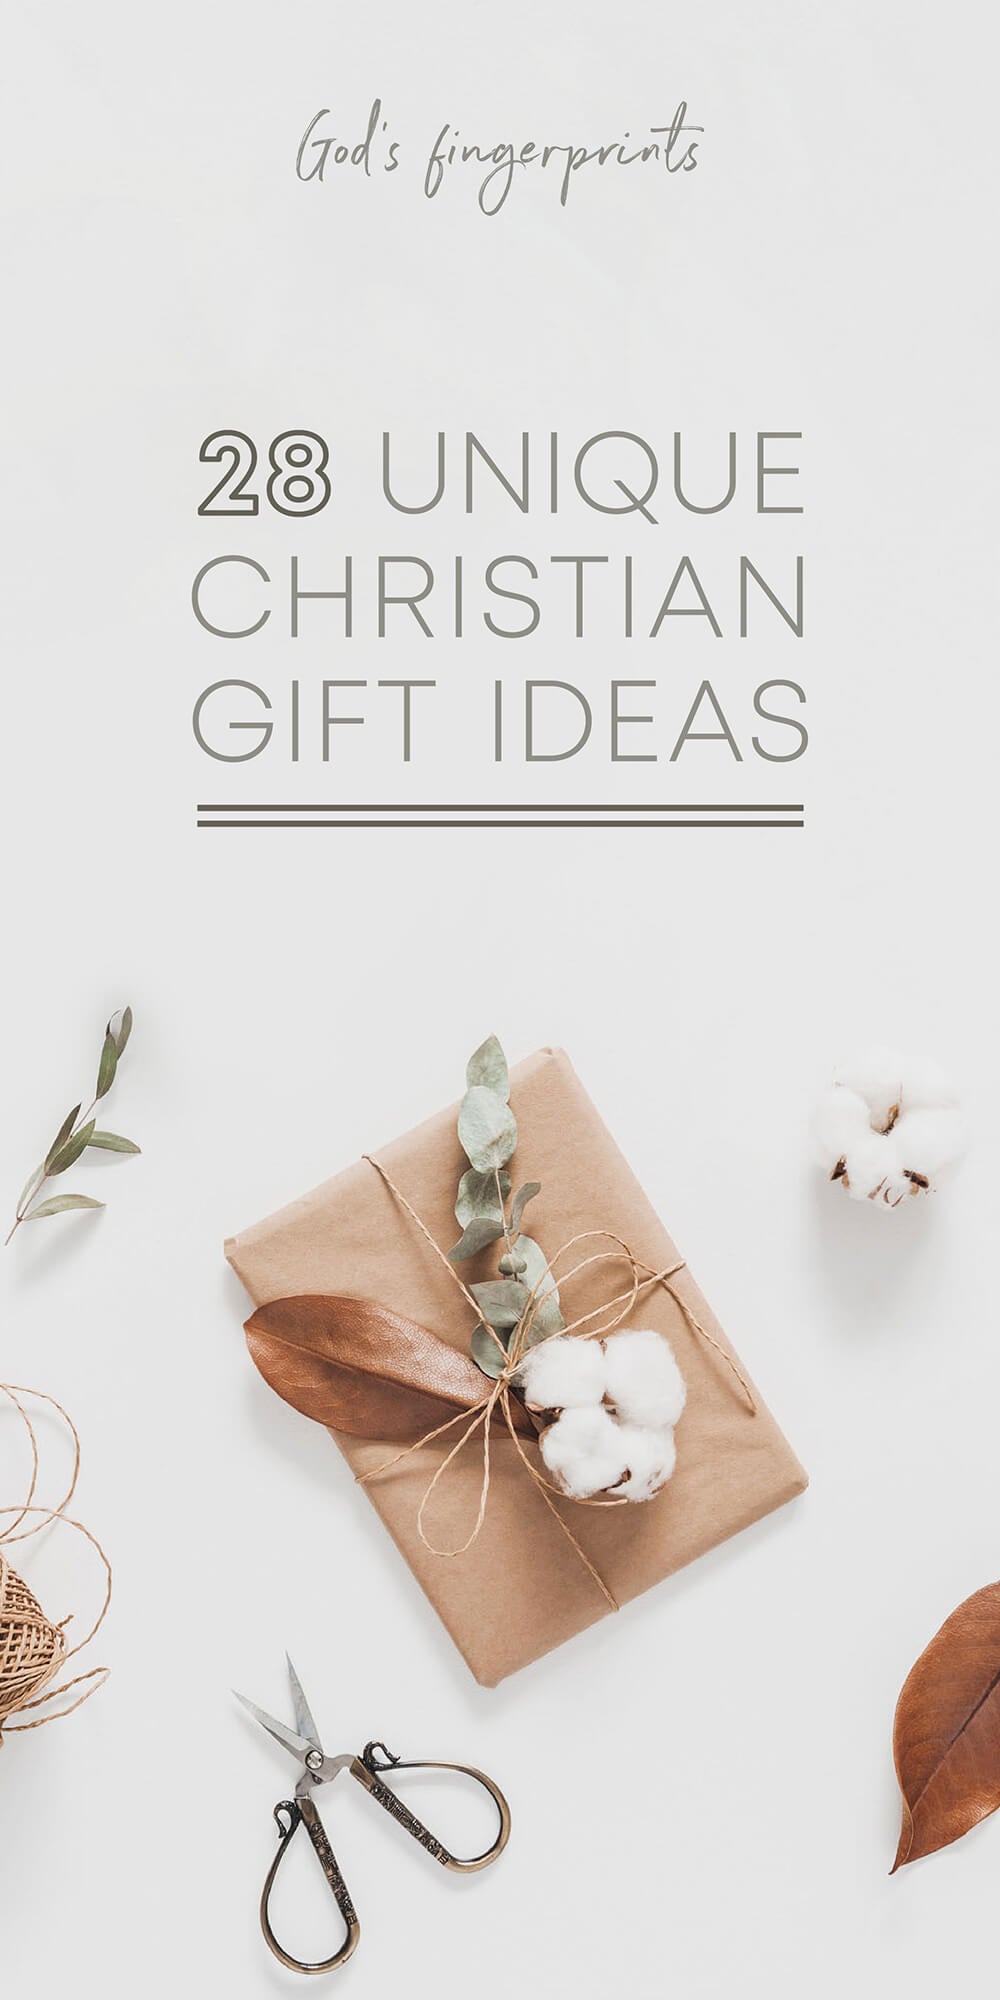 10 Christian Gifts for Brand New Homes – Christian Walls